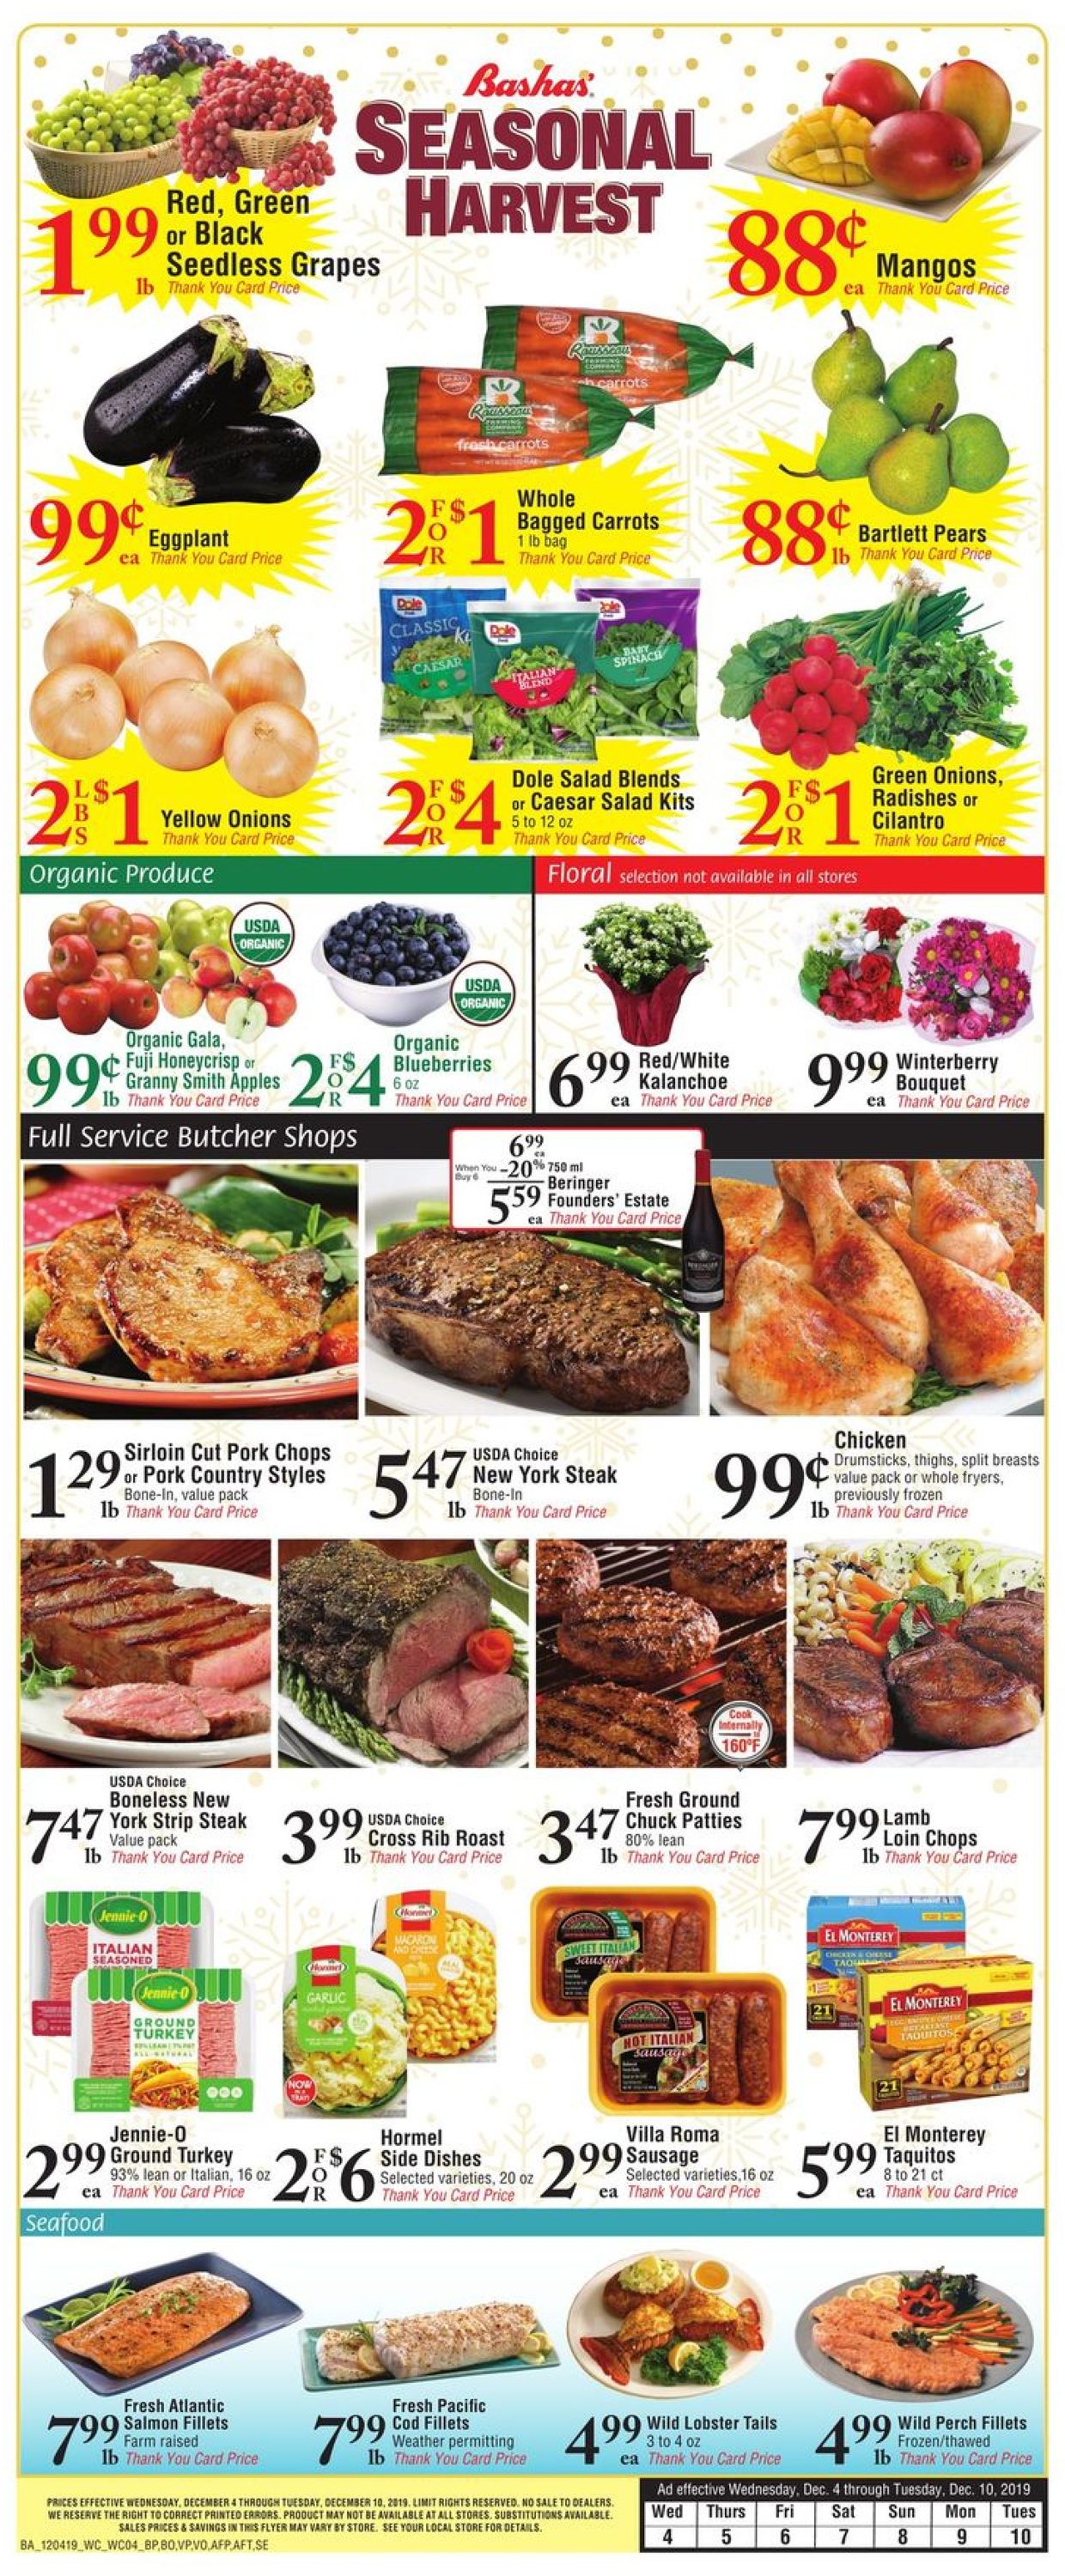 Bashas Ad from 12/04/2019